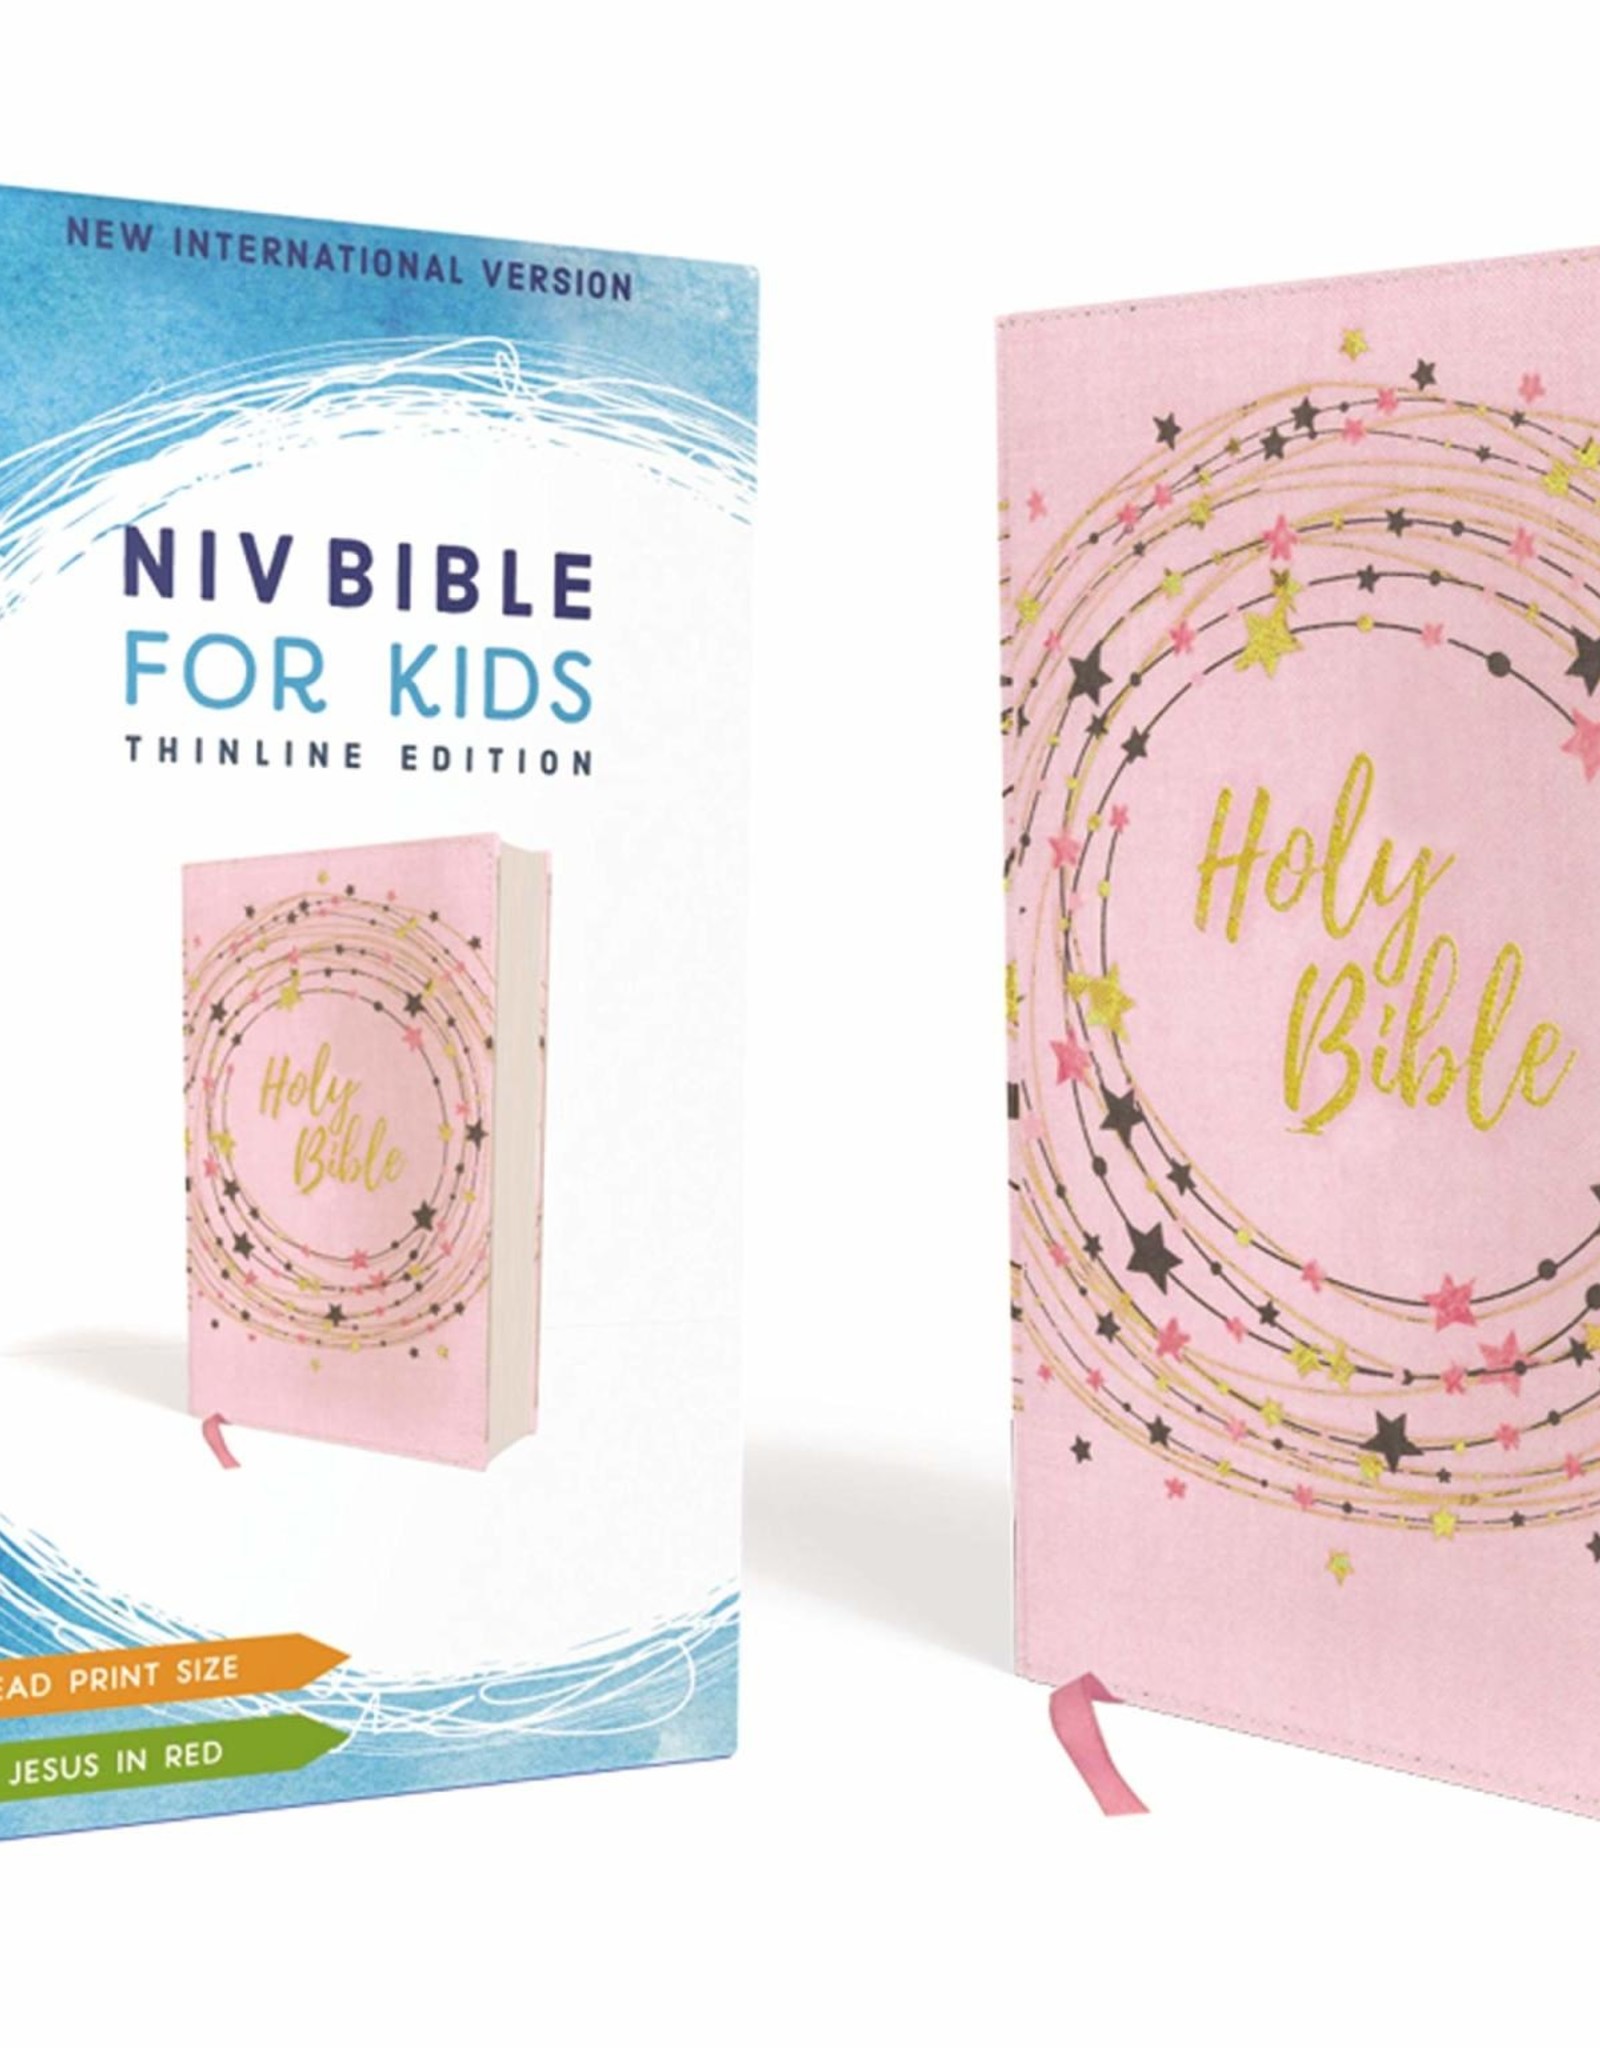 NIV Bible for Kids - Pink with circles and stars